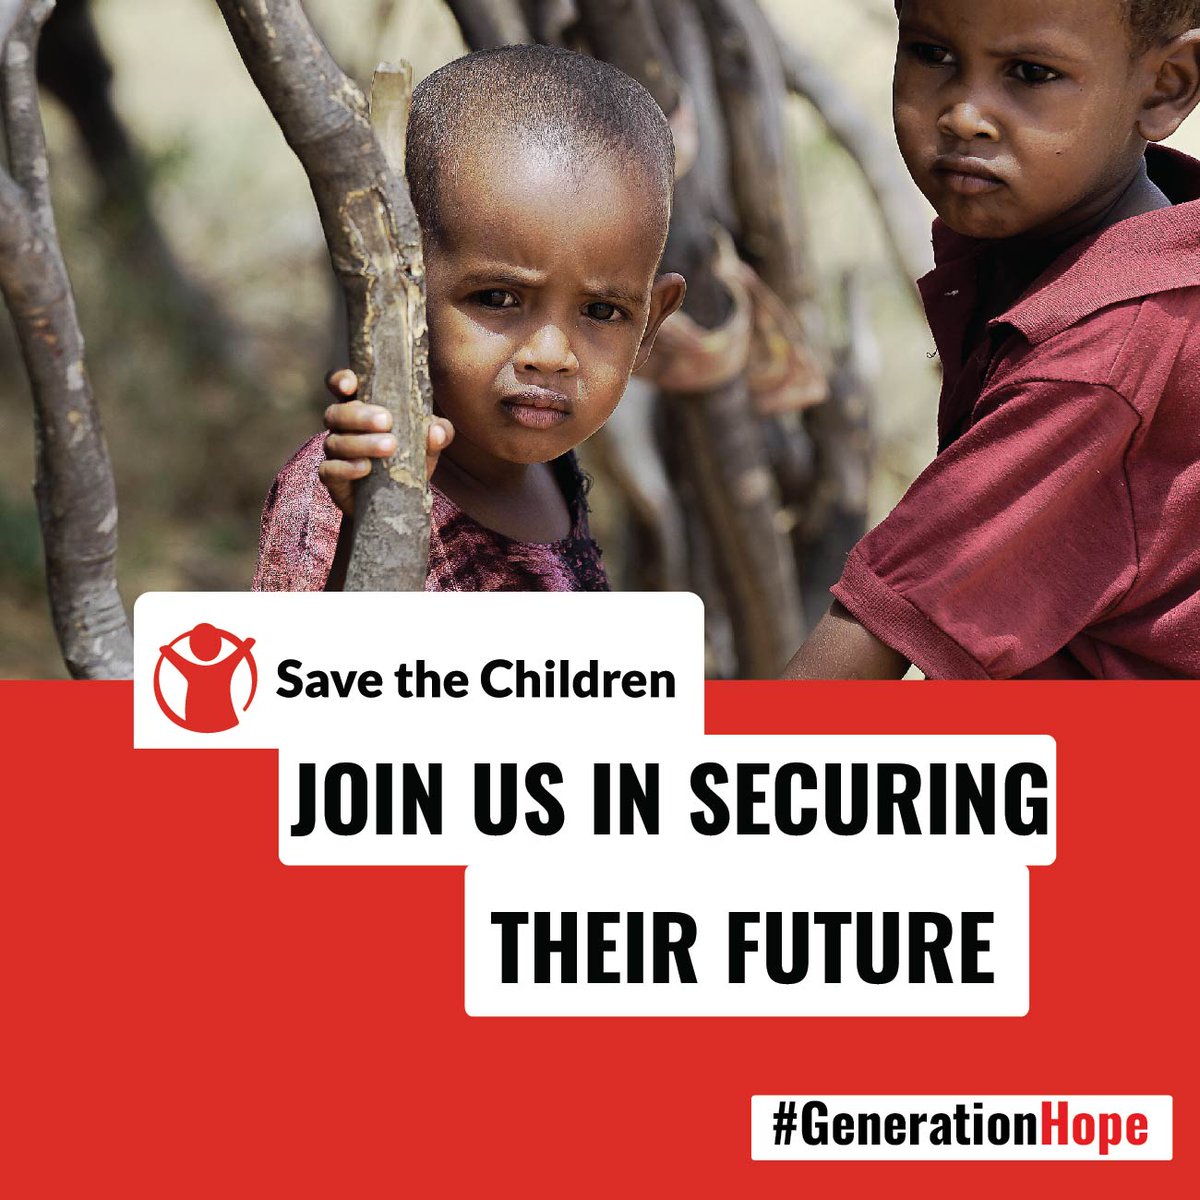 📢📢The long awaited day is here! Join us today as we launch the revolutionary #ChildCentredClimateChangeProgram! Giving Kenyan children a voice in shaping a sustainable #GenerationHope #ClimateAction